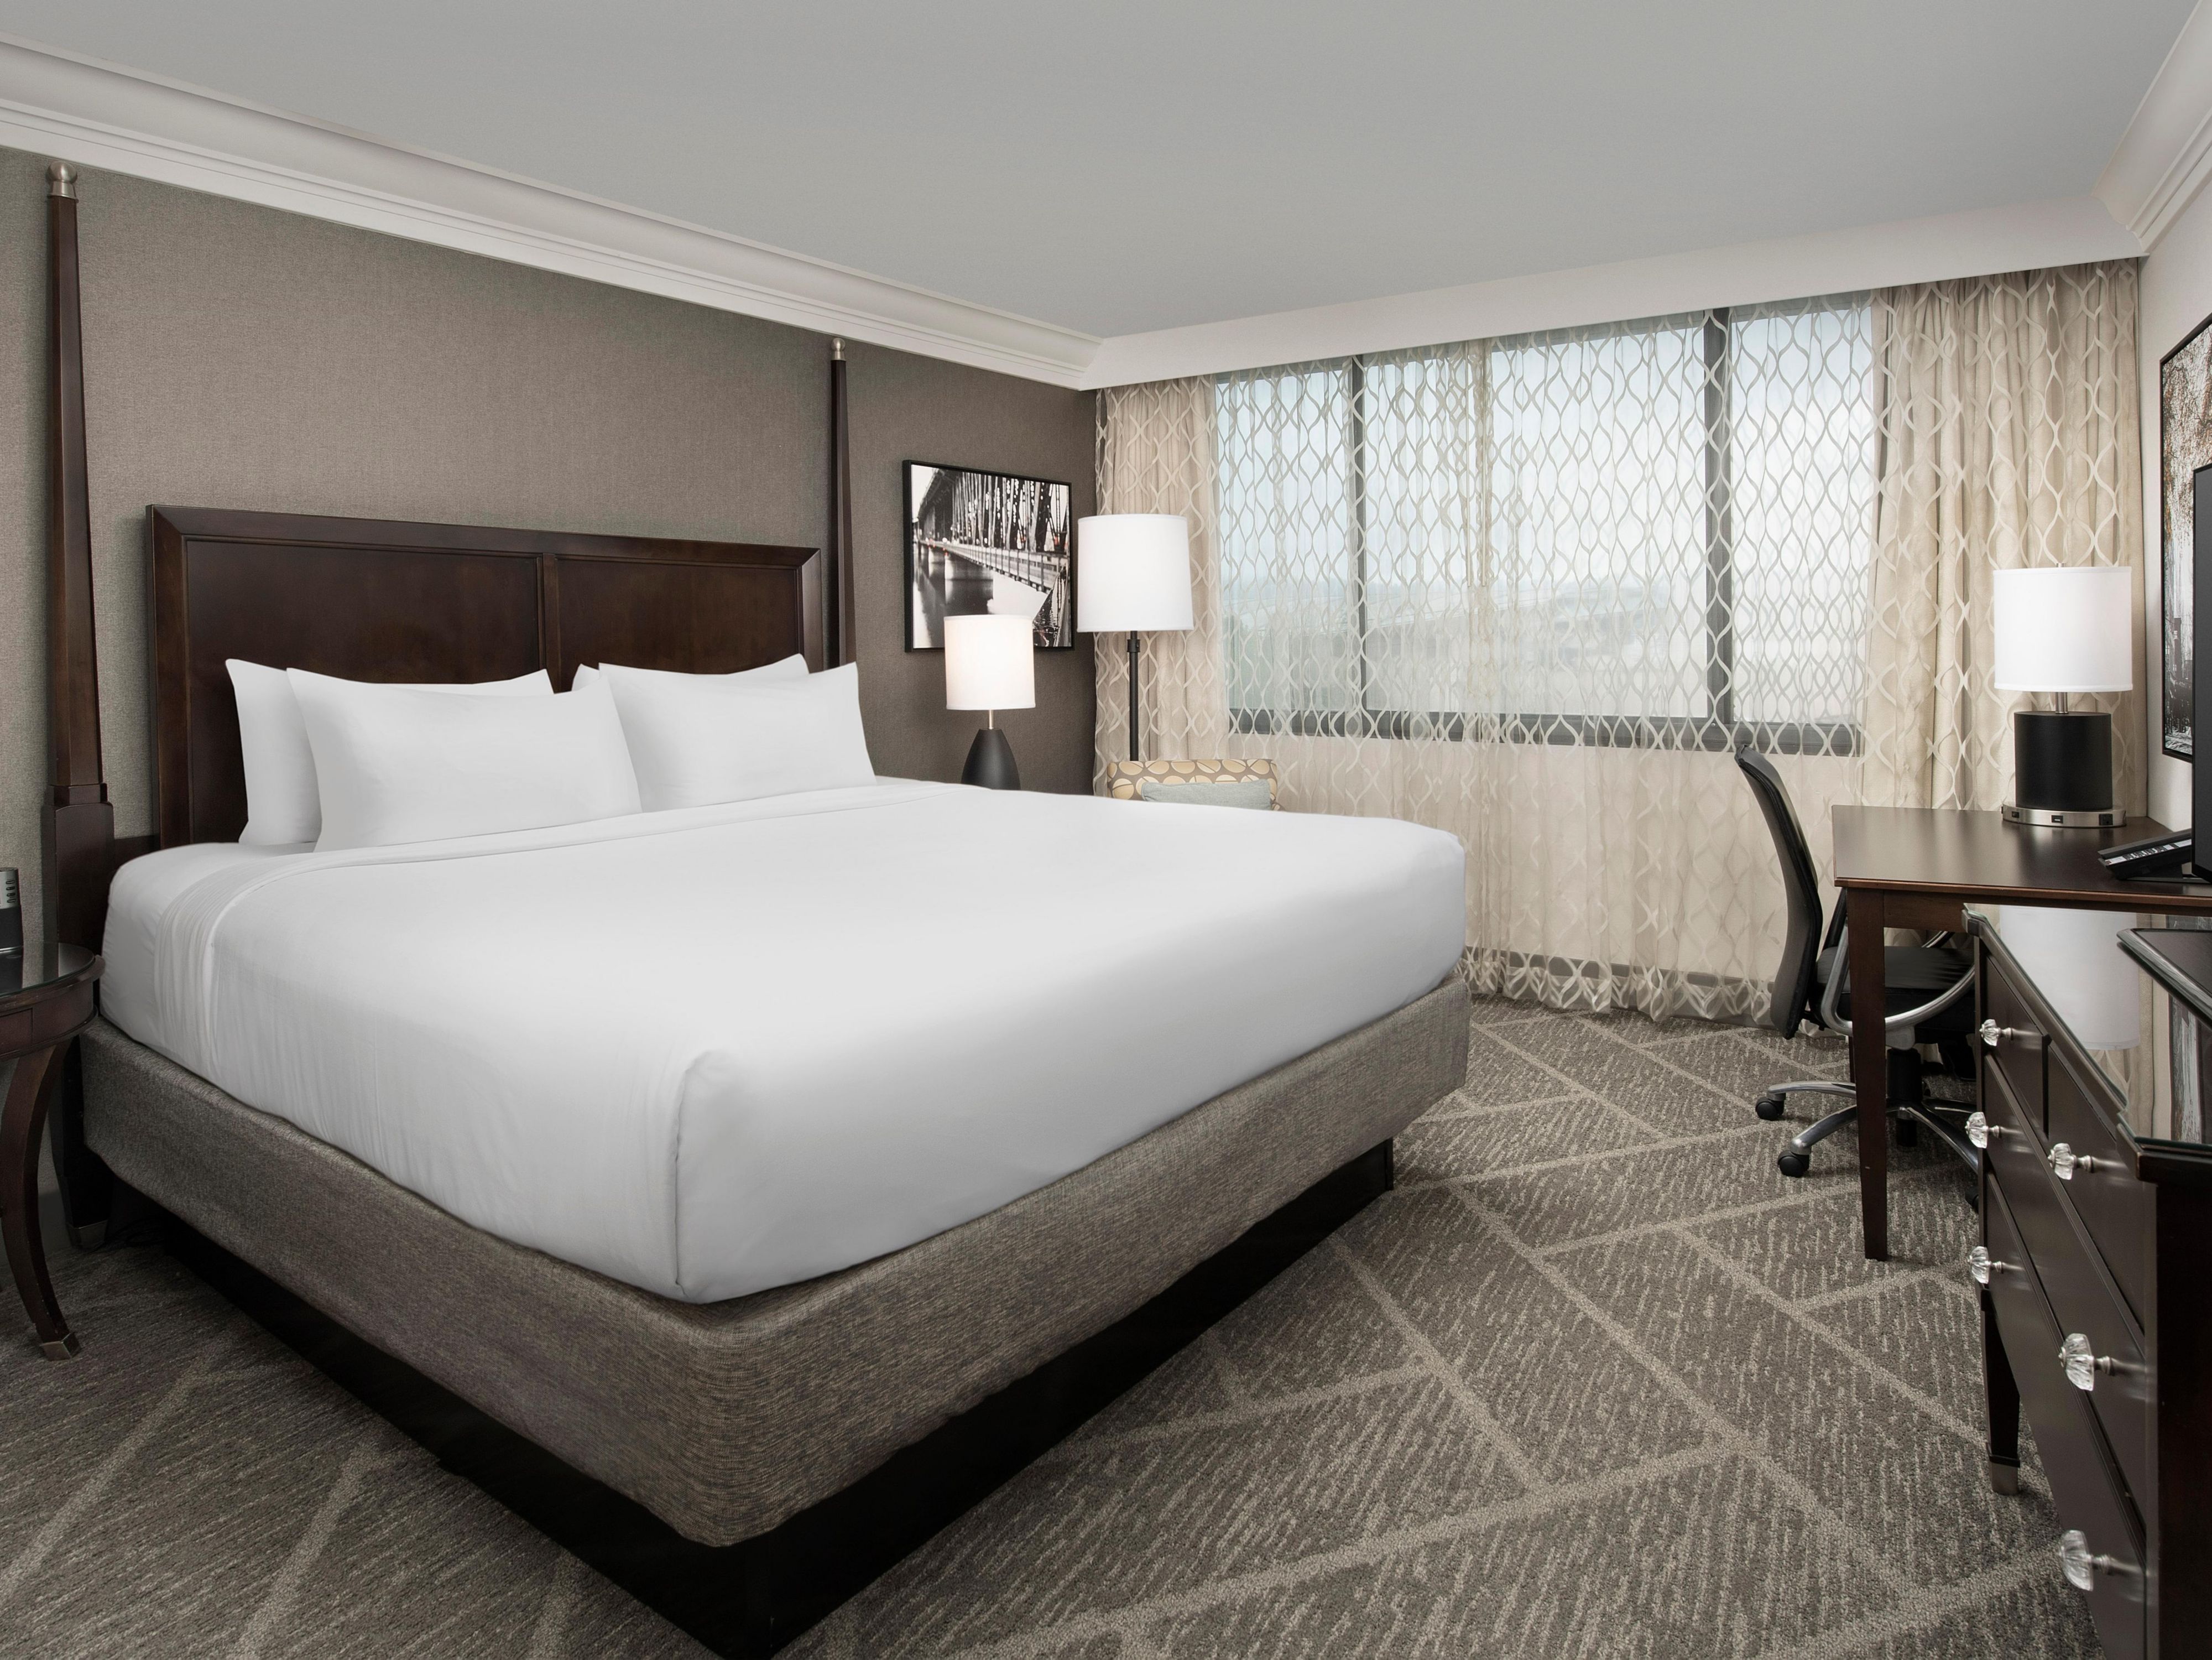 Our rooms are designed to be a restful respite after a long day. You'll enjoy complimentary Wi-Fi, premium bedding, aromatherapy kits, and dedicated Quiet Zone rooms. You can even indulge in upscale dining from the comfort of your room with our freshly-prepared room service offerings.
